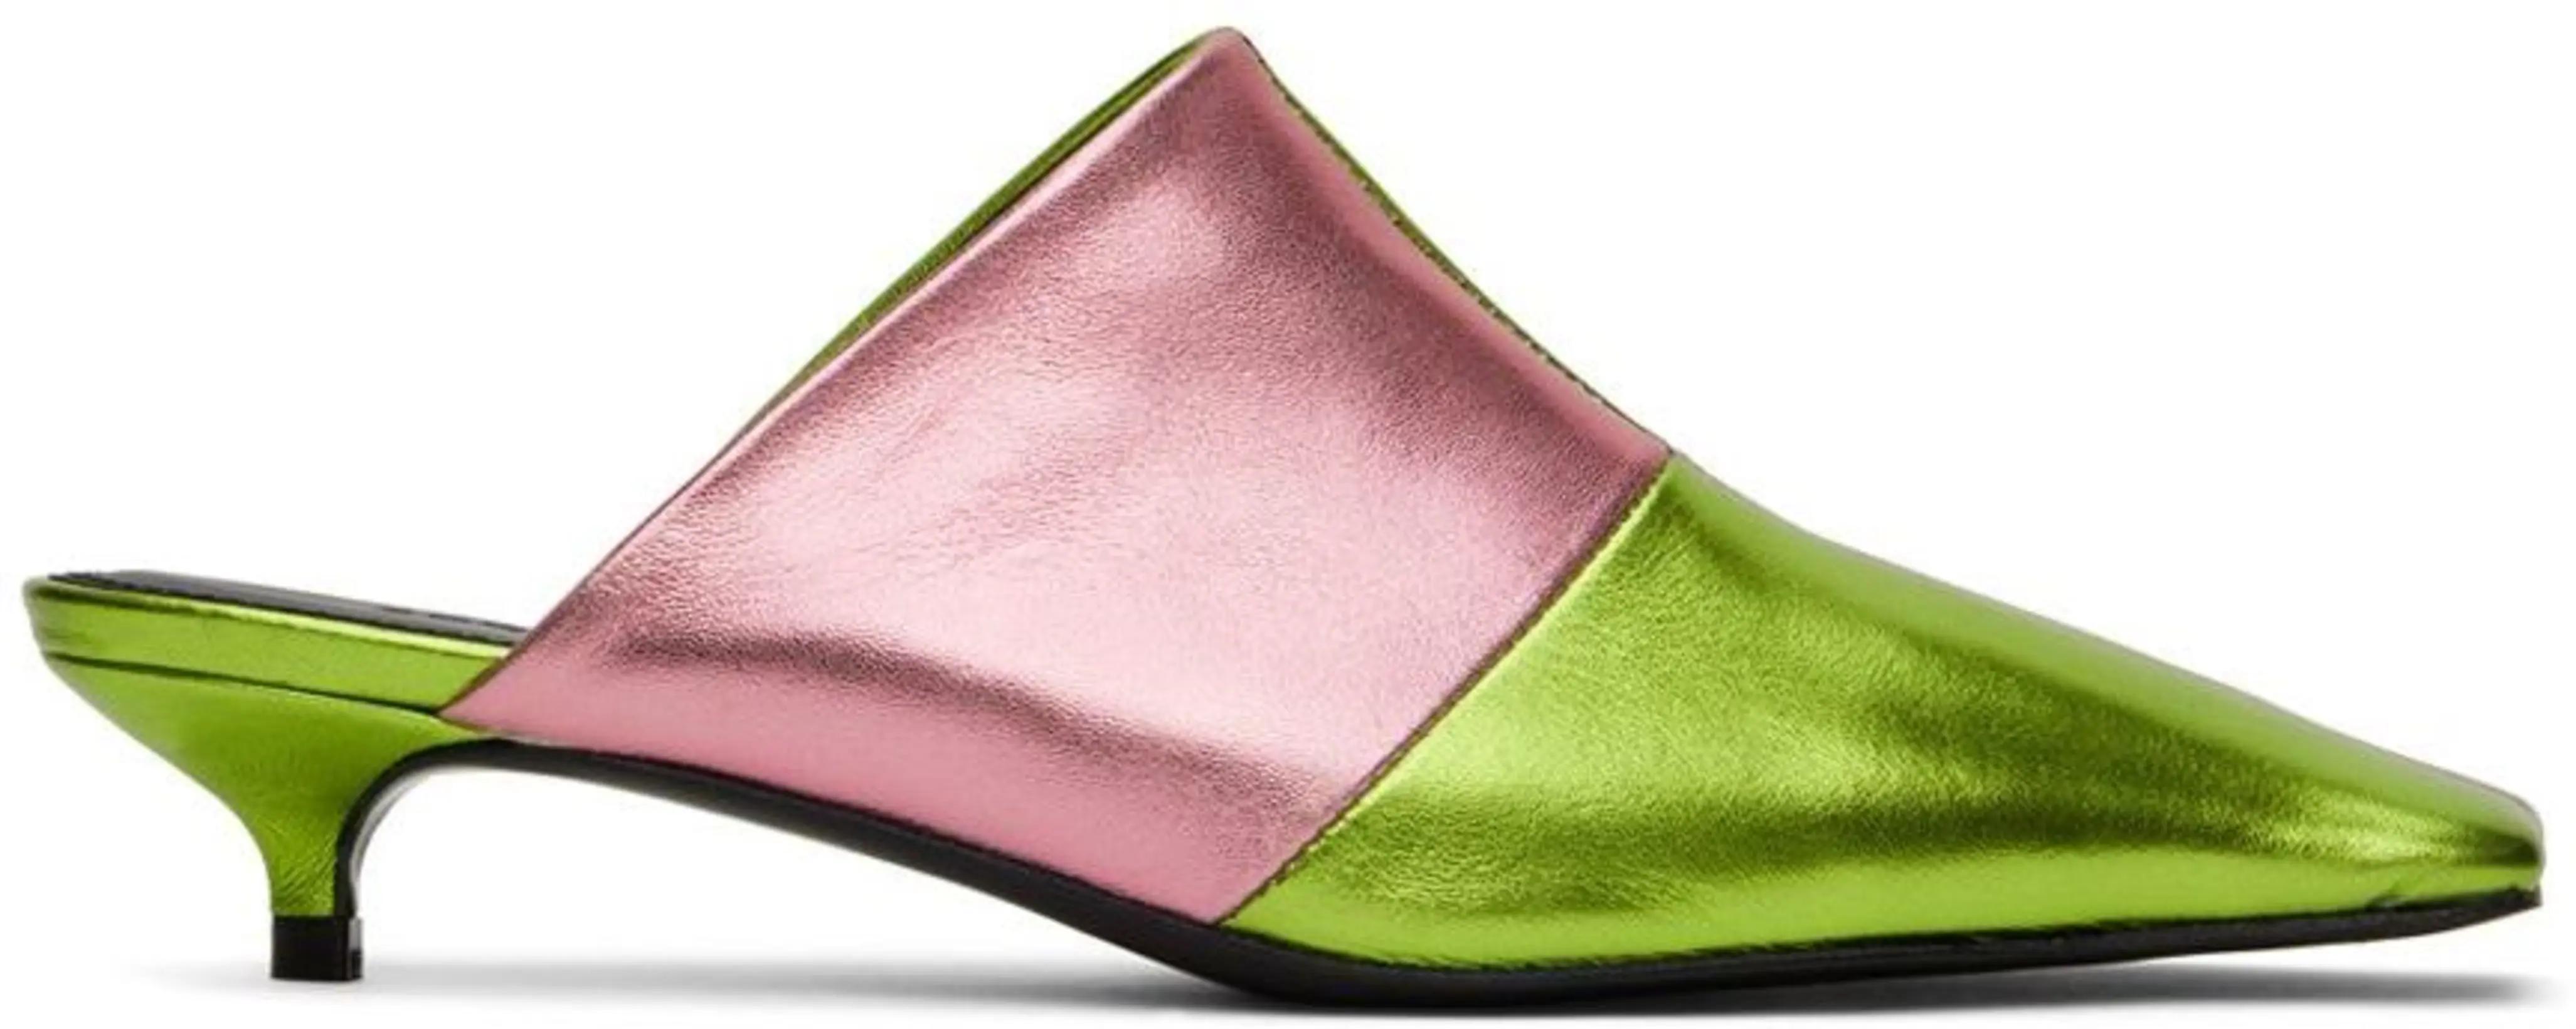 Green & Pink Lord Mules by ABRA